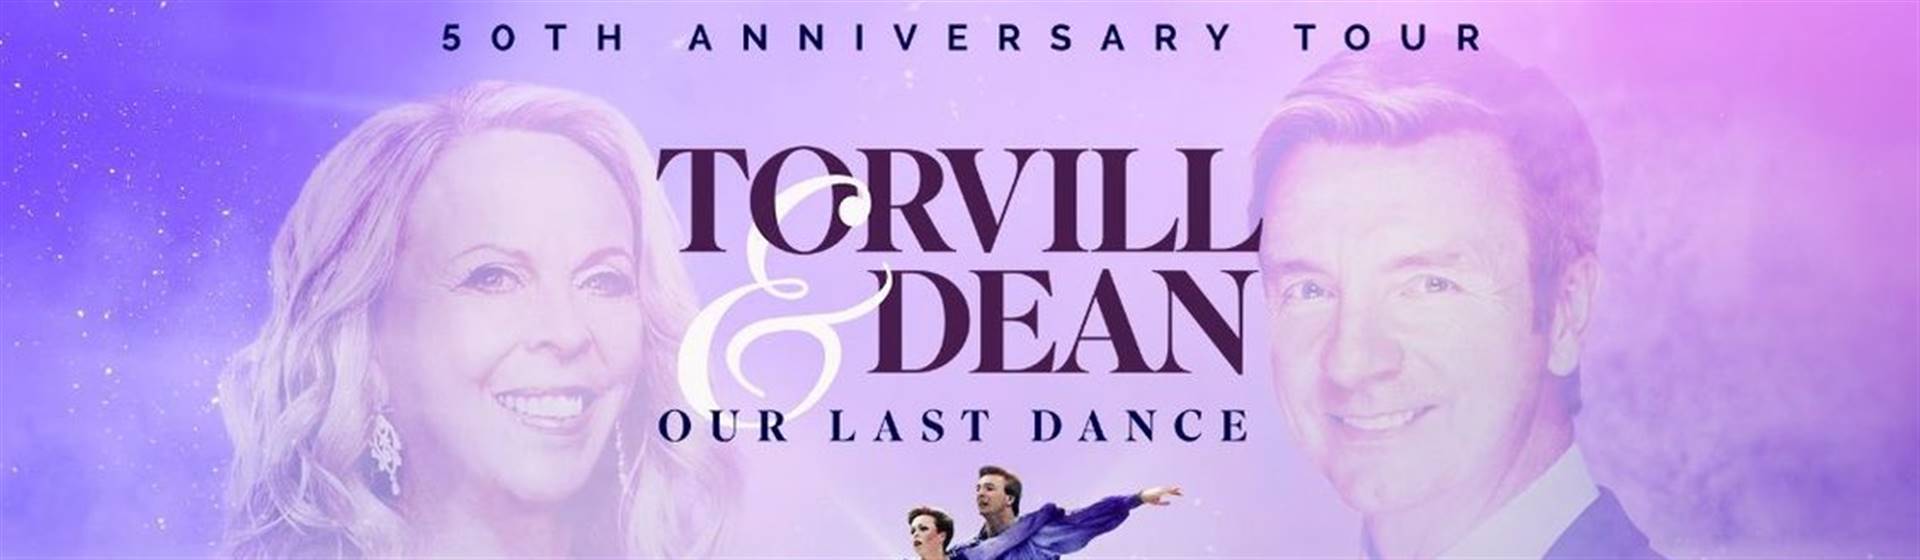 Durham, Beamish, Torvill & Dean - Our Last Dance